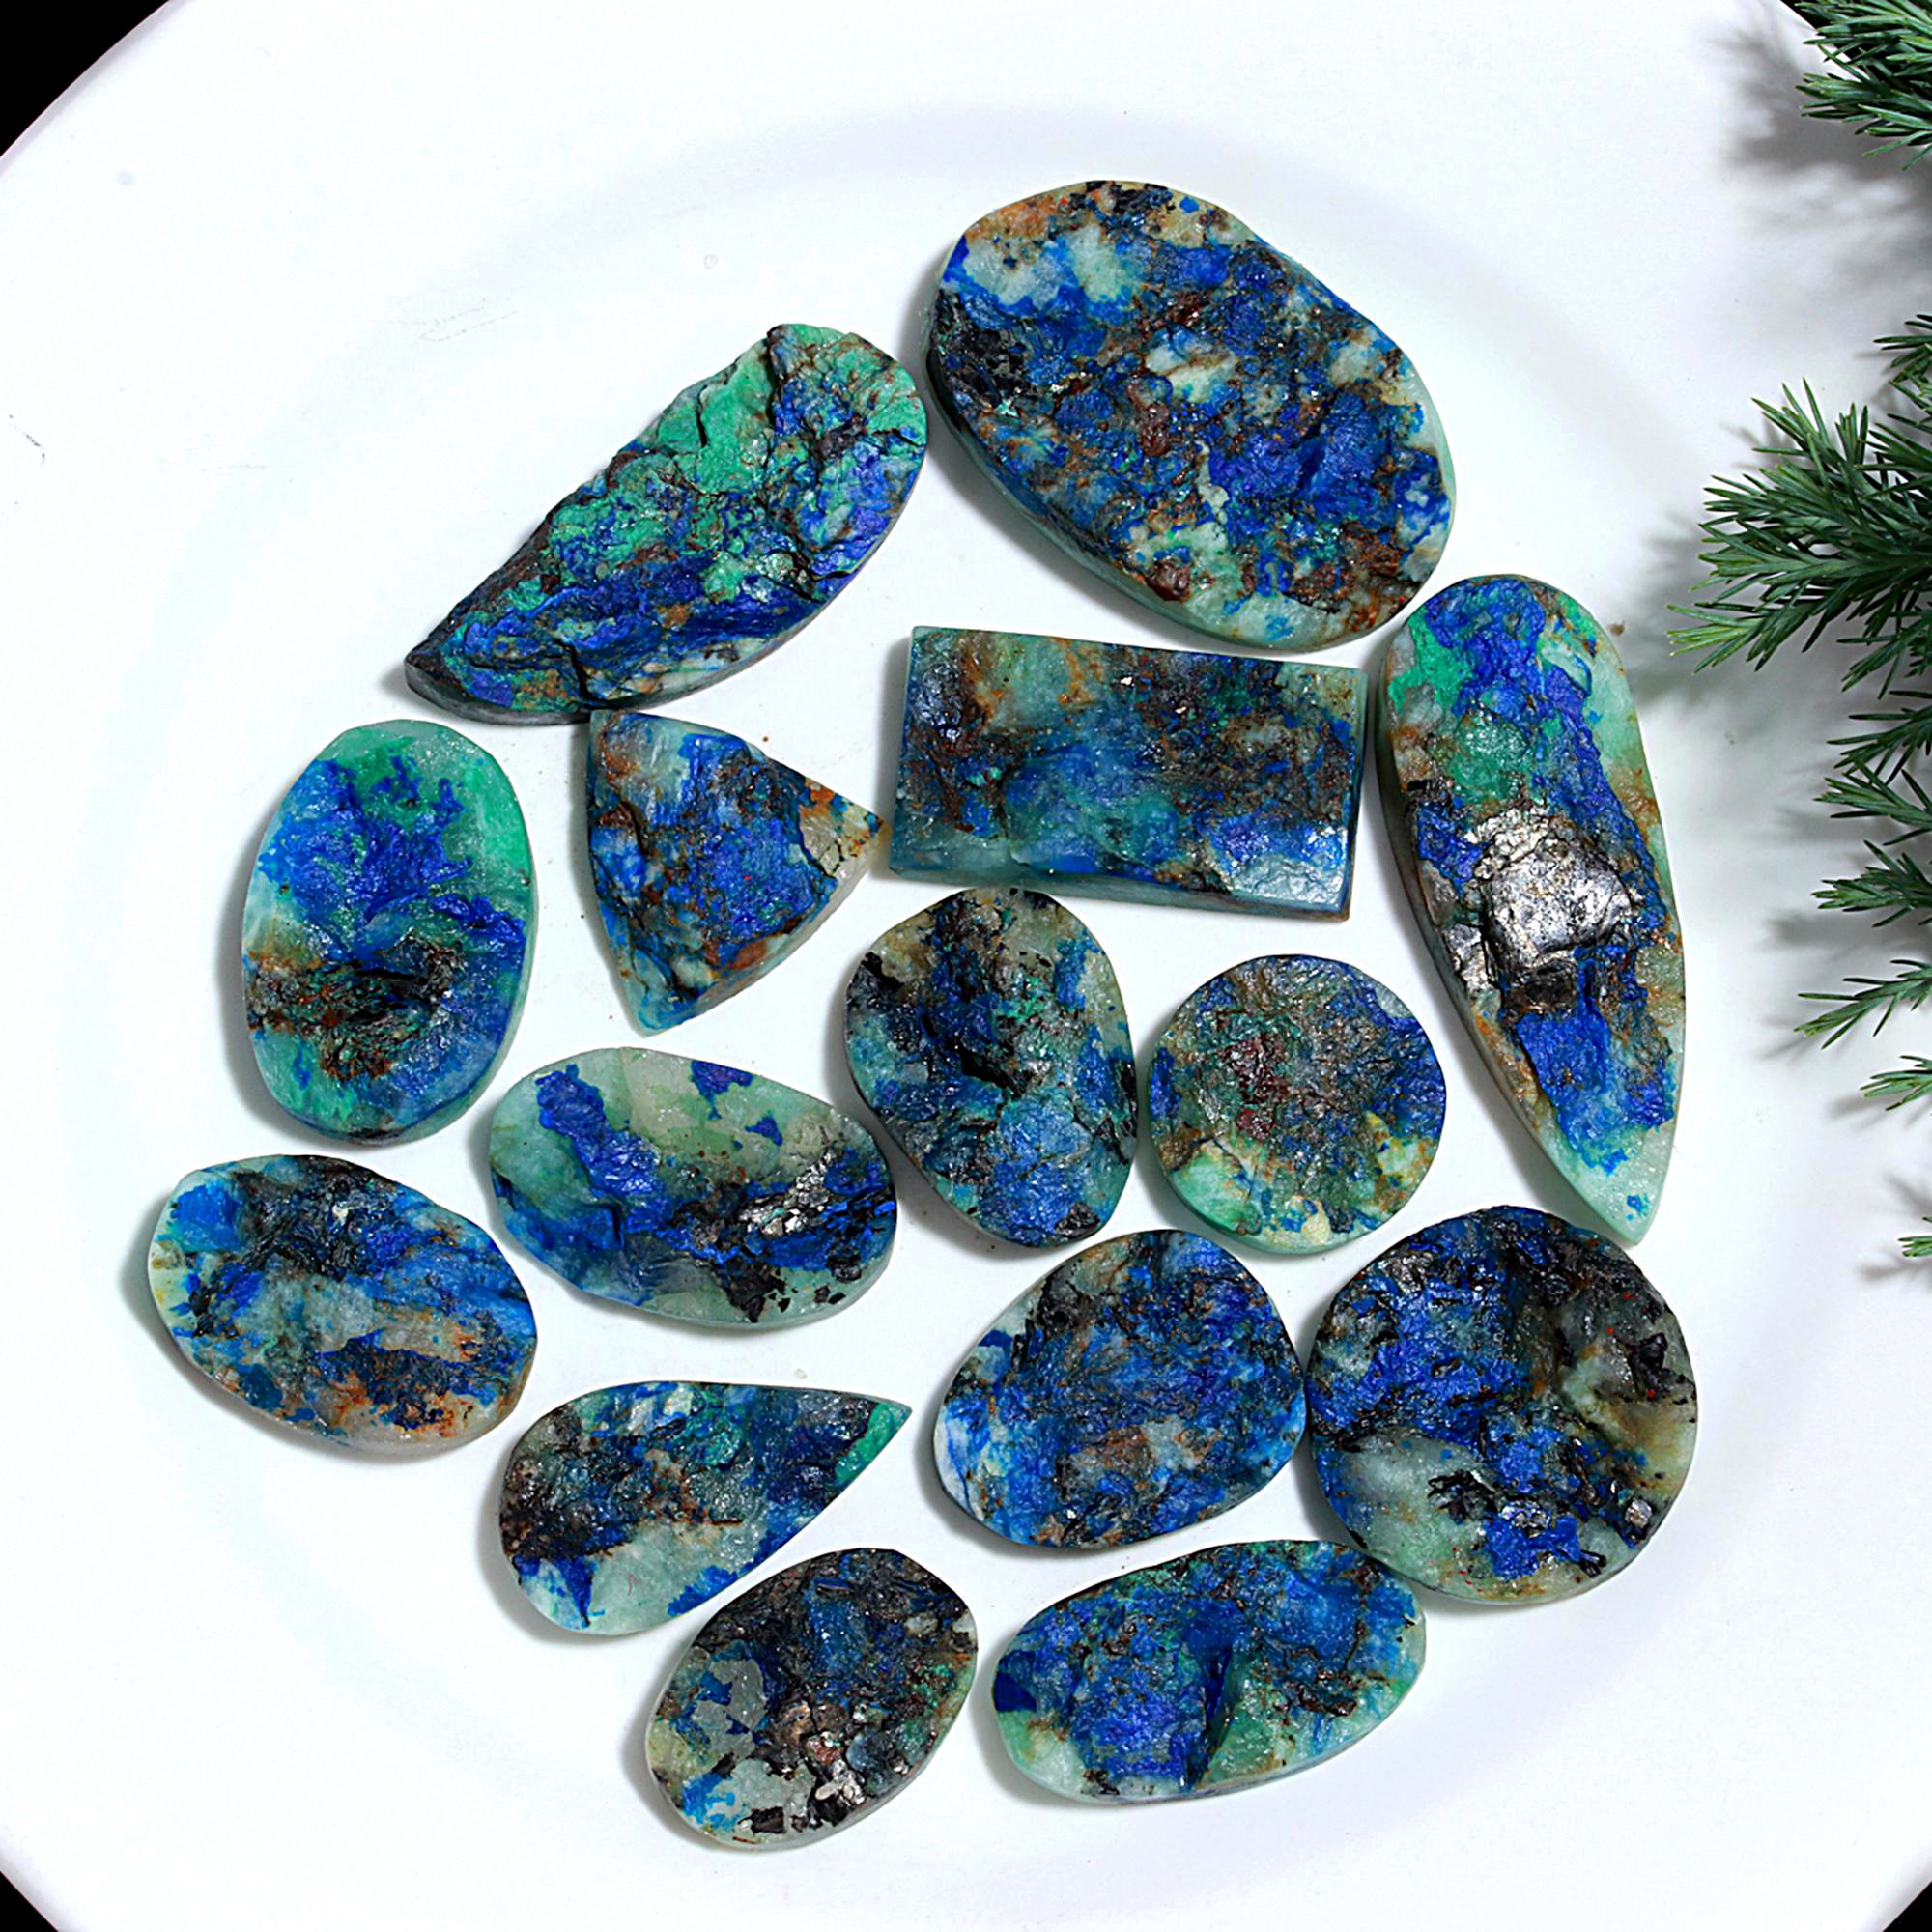 15 Pcs 618.Cts Natural Azurite Druzy Unpolished Loose Cabochon Gemstone For Jewelry Wholesale Lot Size 48x18 22x23mm